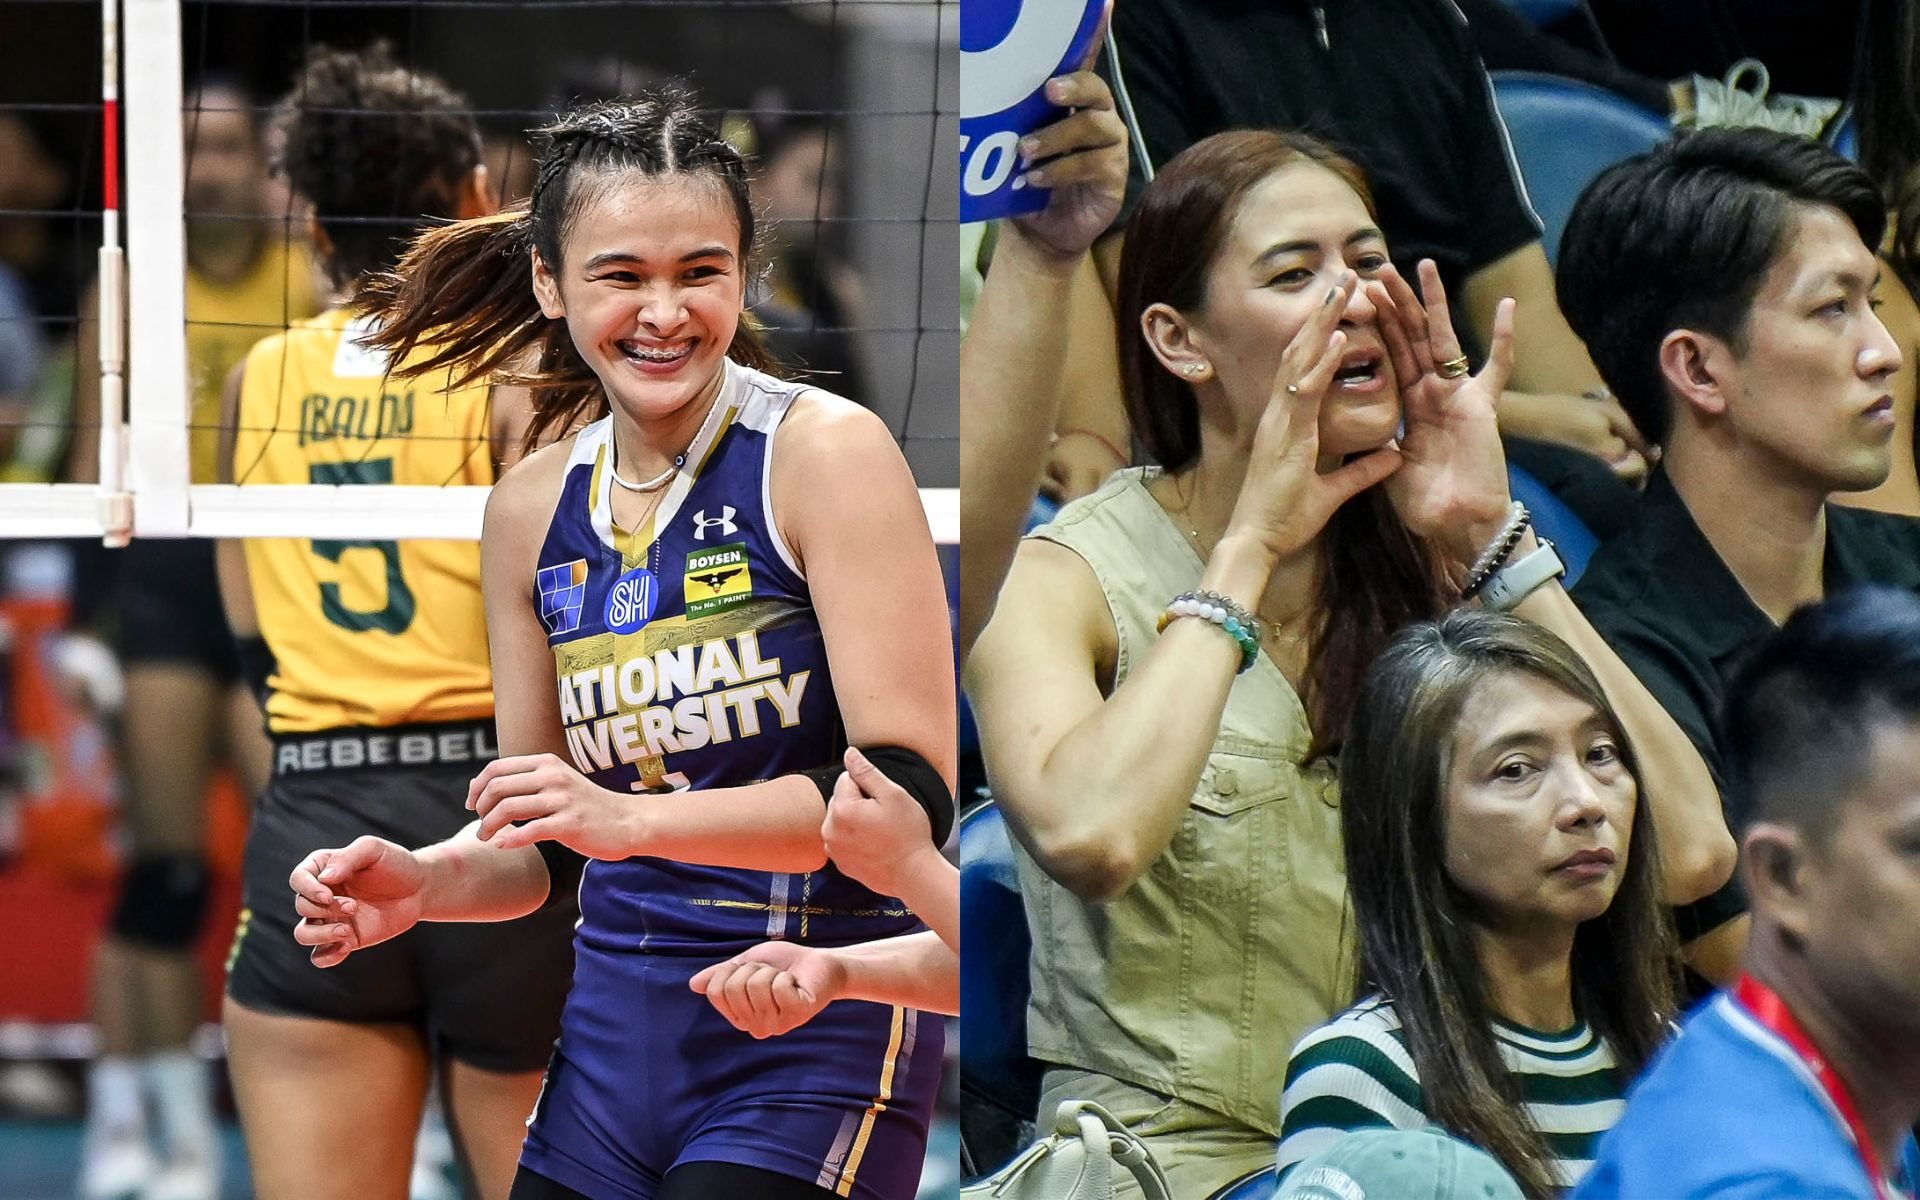 Boosted by FEU wake-up call, Jaja Santiago visit, mighty NU regains title contender form